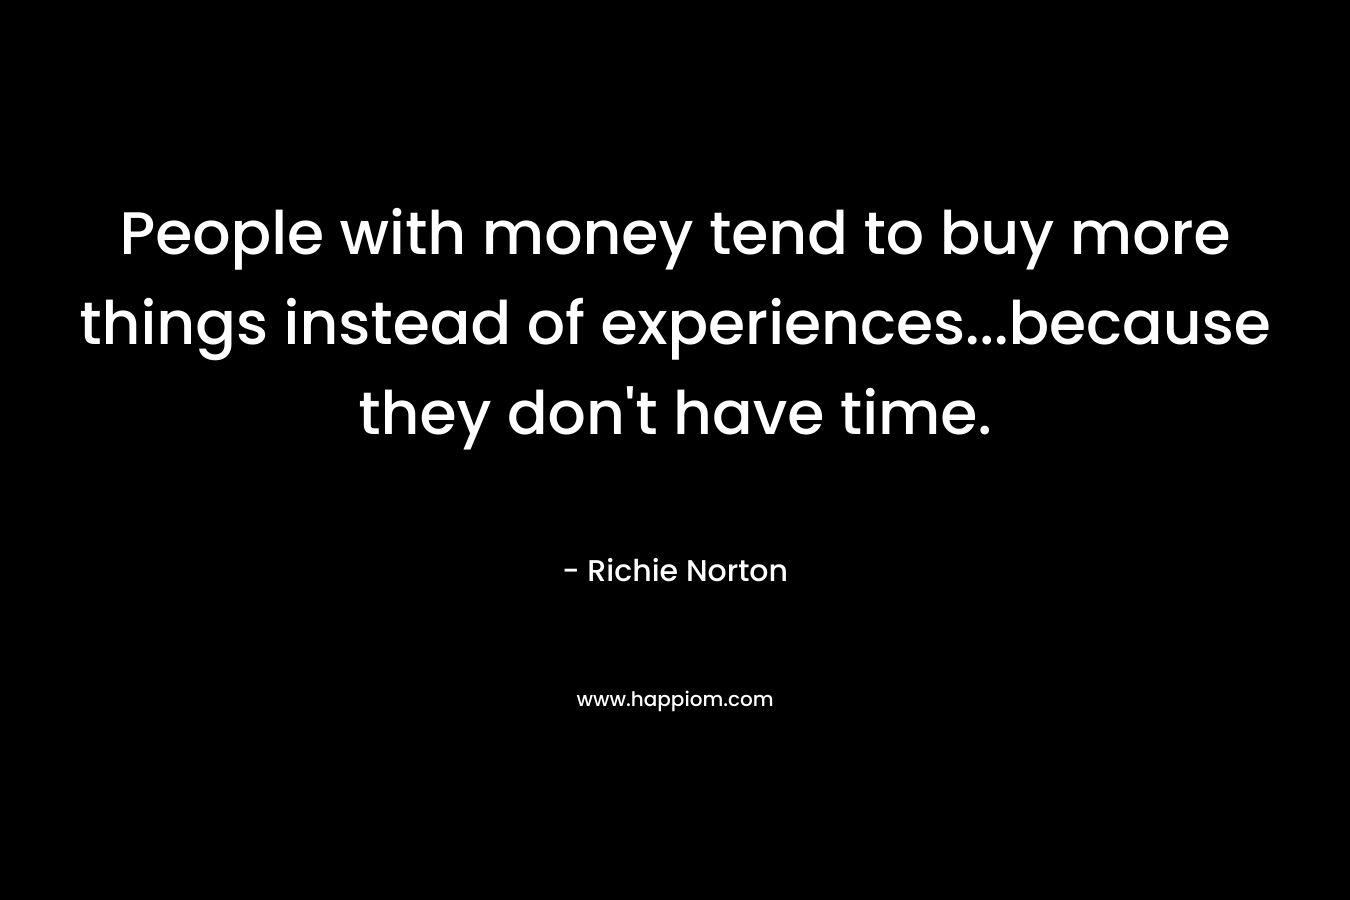 People with money tend to buy more things instead of experiences...because they don't have time.